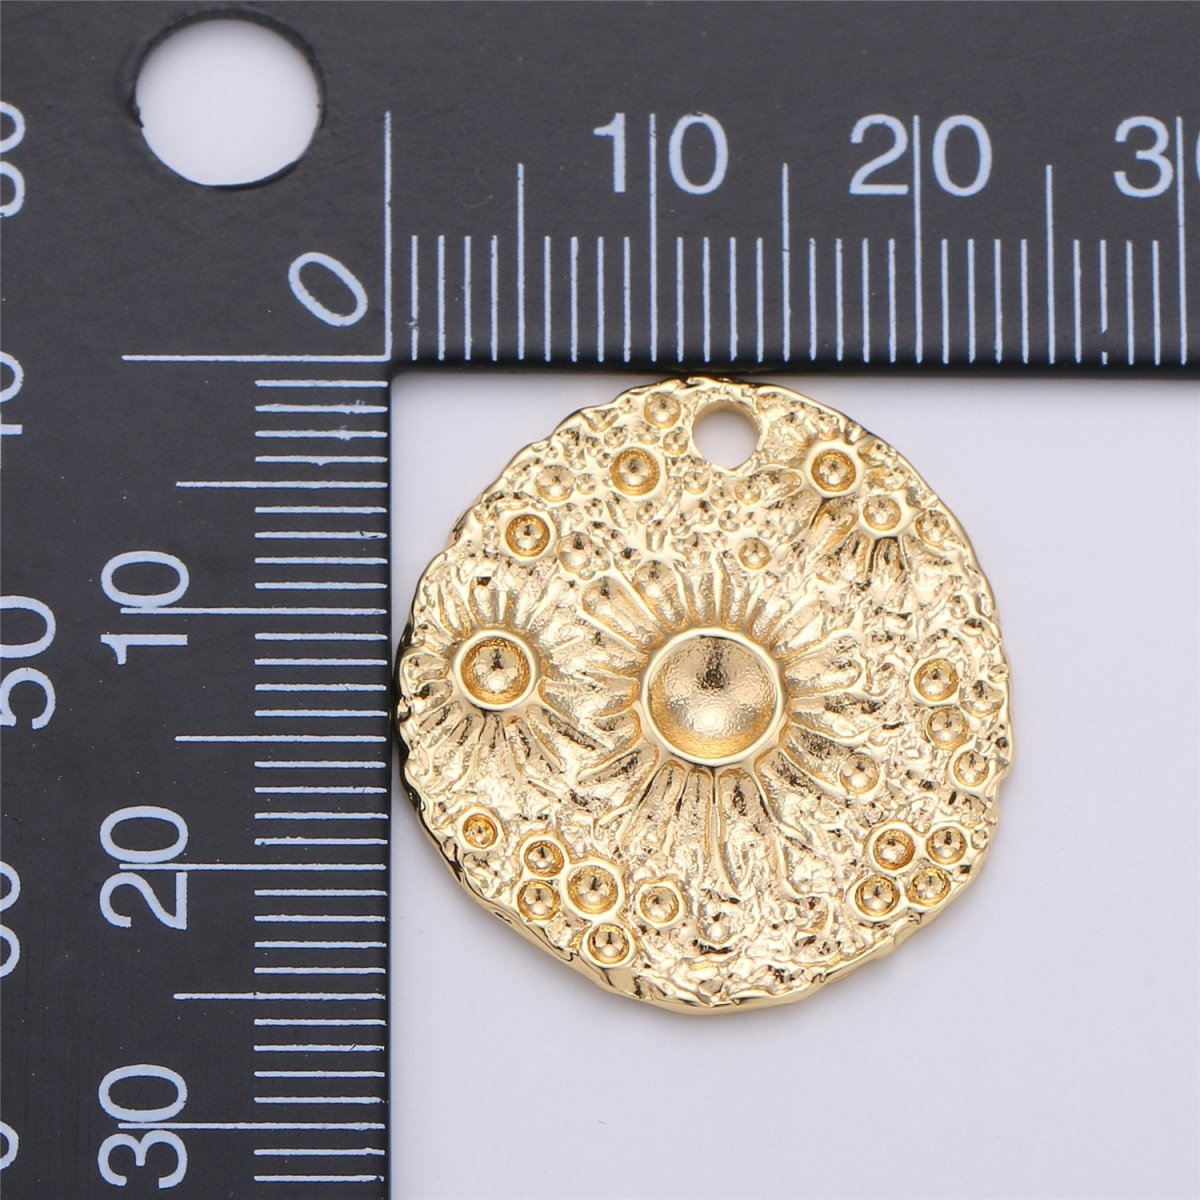 Rustic Moon Pendant Coin Charm in gold filled for Necklace Earring Charm Hammered Medallion Coin Pendant Round Disc Charm Pendant C-617 - DLUXCA